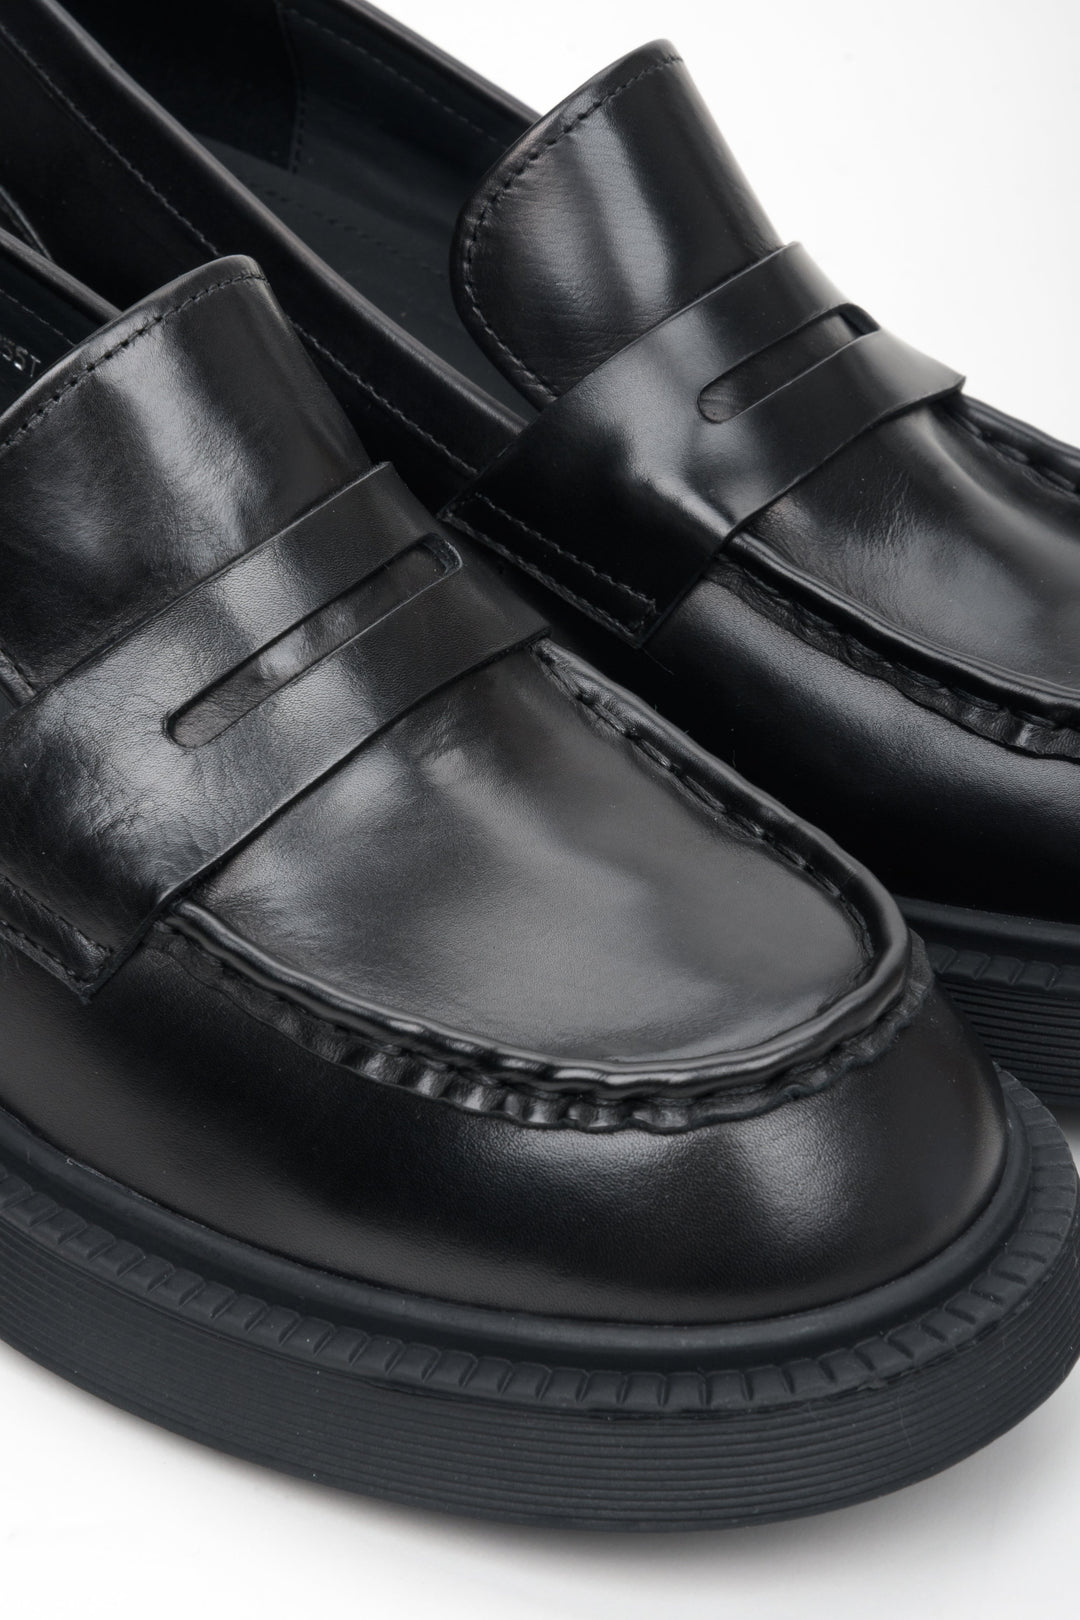 Women's moccasins made of genuine leather in black by Estro - close-up on details.